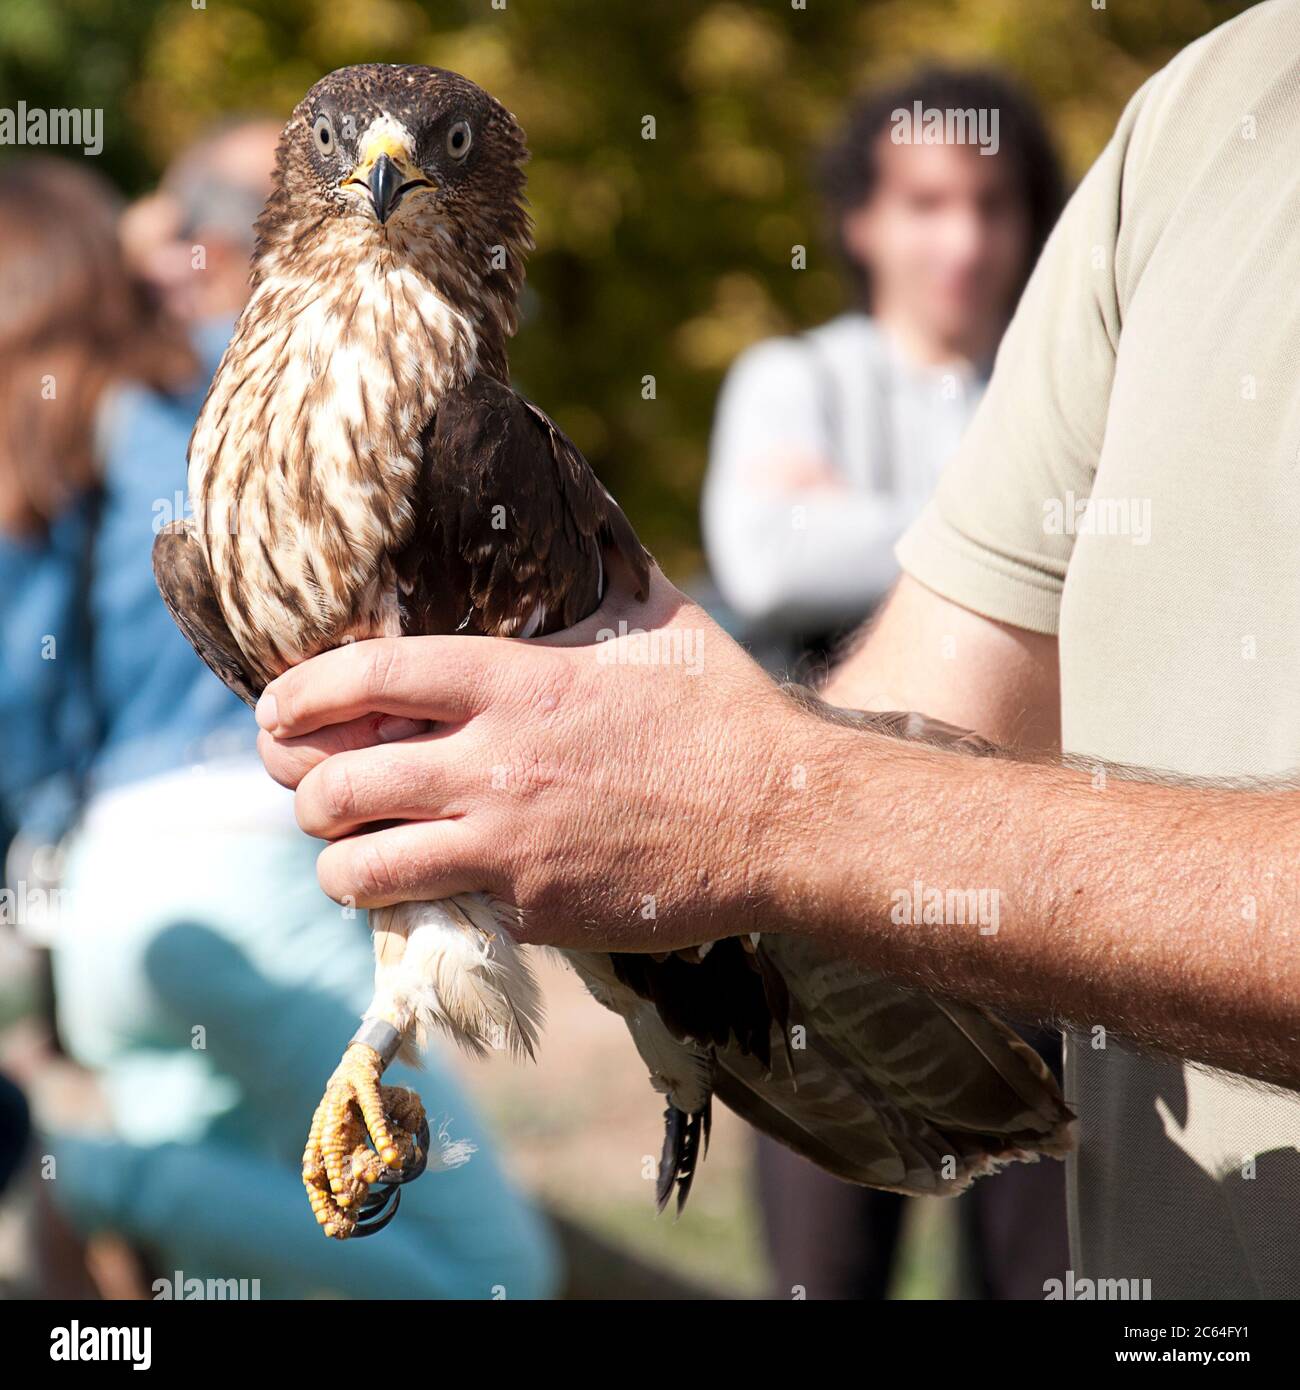 European Honey Buzzard (Pernis apivorus), wounded in the hands of a veterinarian, in the background a blurred group of people watching the scene Stock Photo